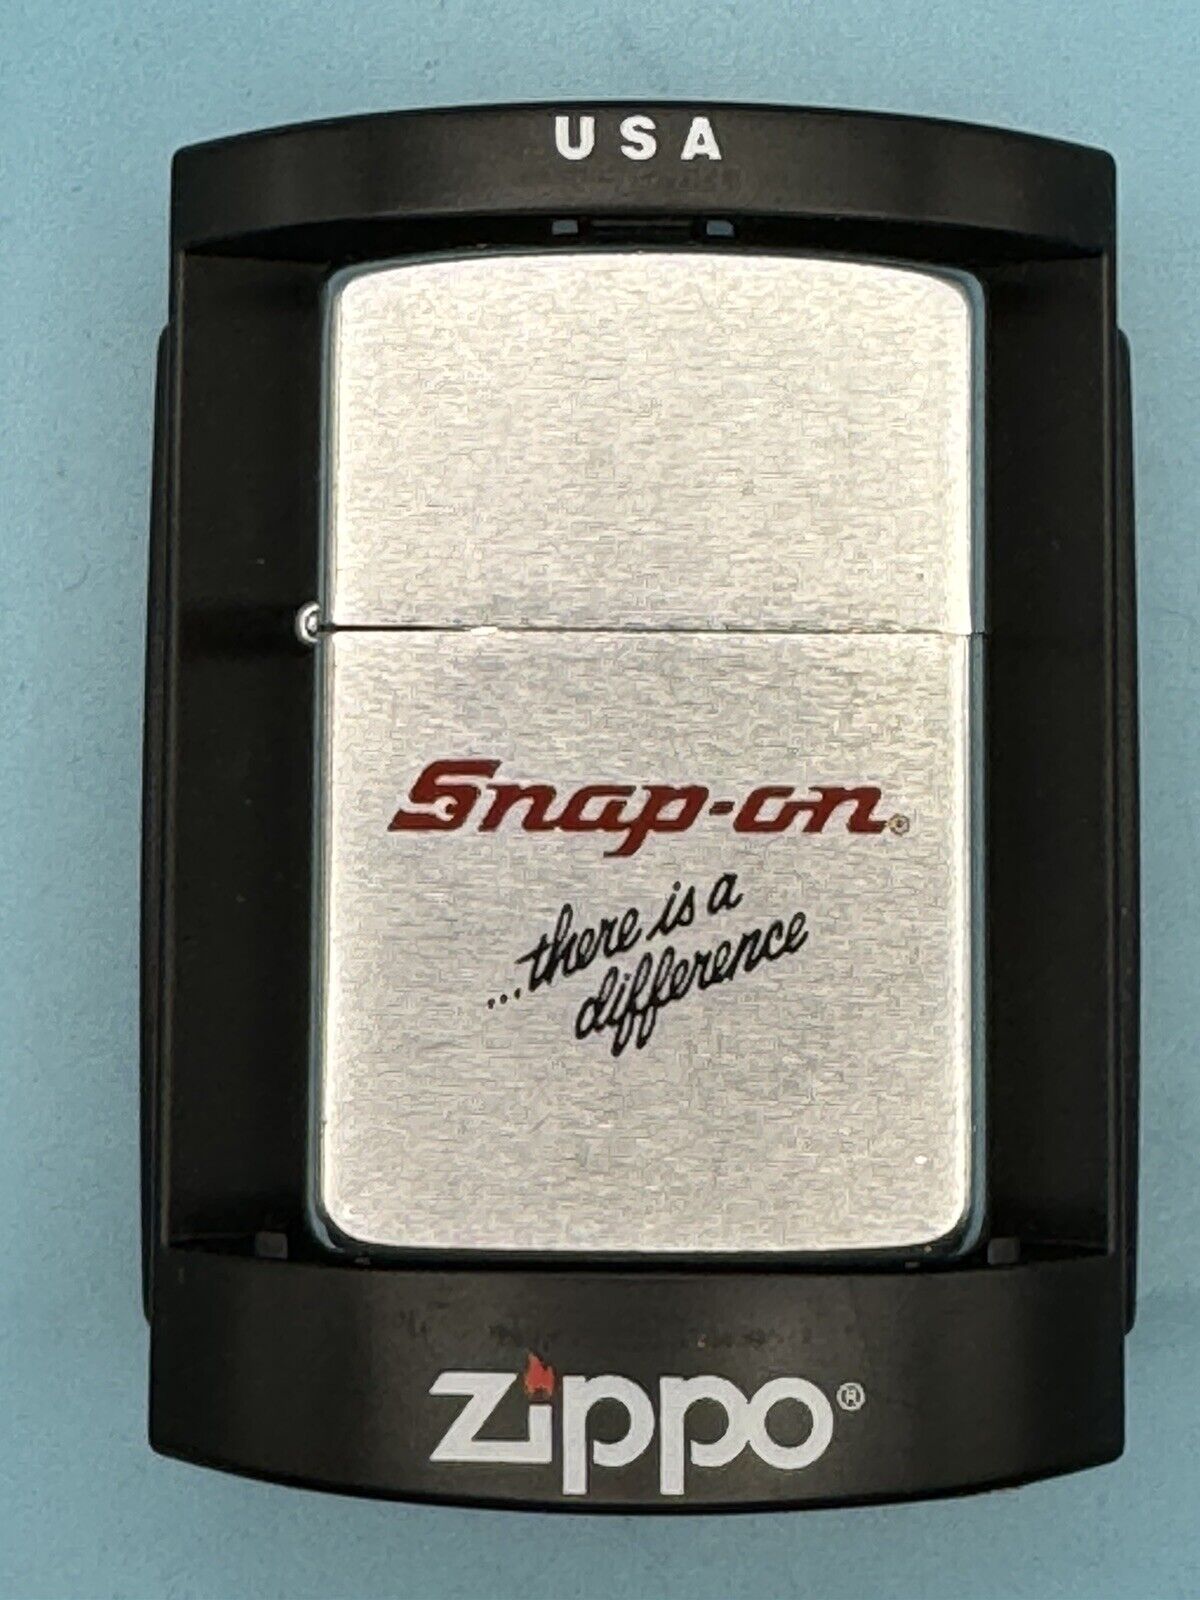 Vintage 1988 Snap On There Is A Difference Chrome Zippo Lighter Snap-On